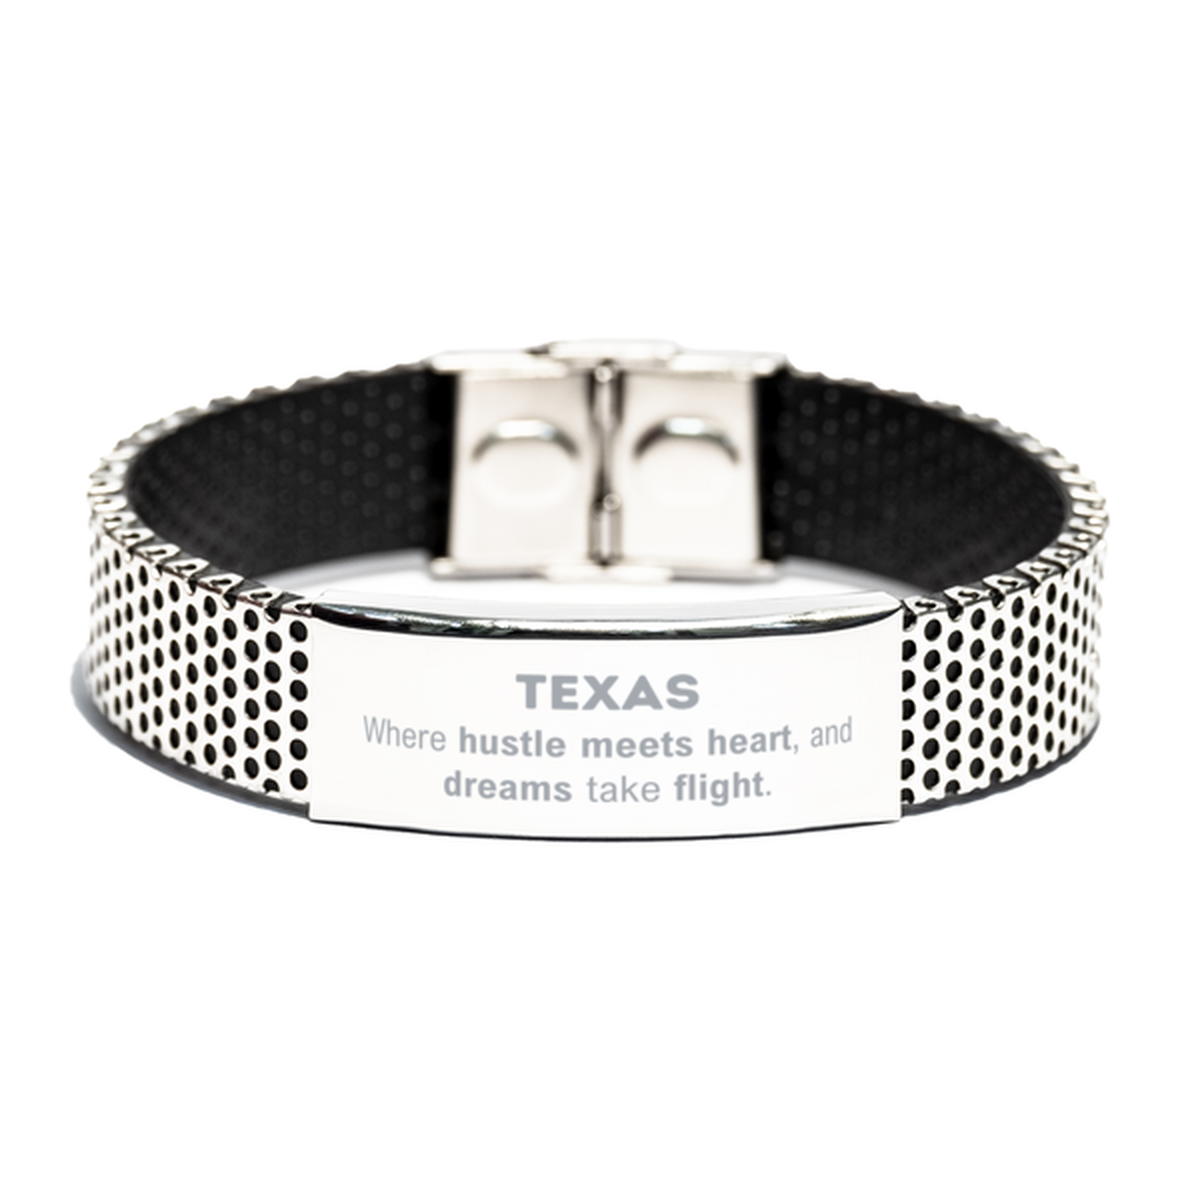 Texas: Where hustle meets heart, and dreams take flight, Texas Gifts, Proud Texas Christmas Birthday Texas Stainless Steel Bracelet, Texas State People, Men, Women, Friends